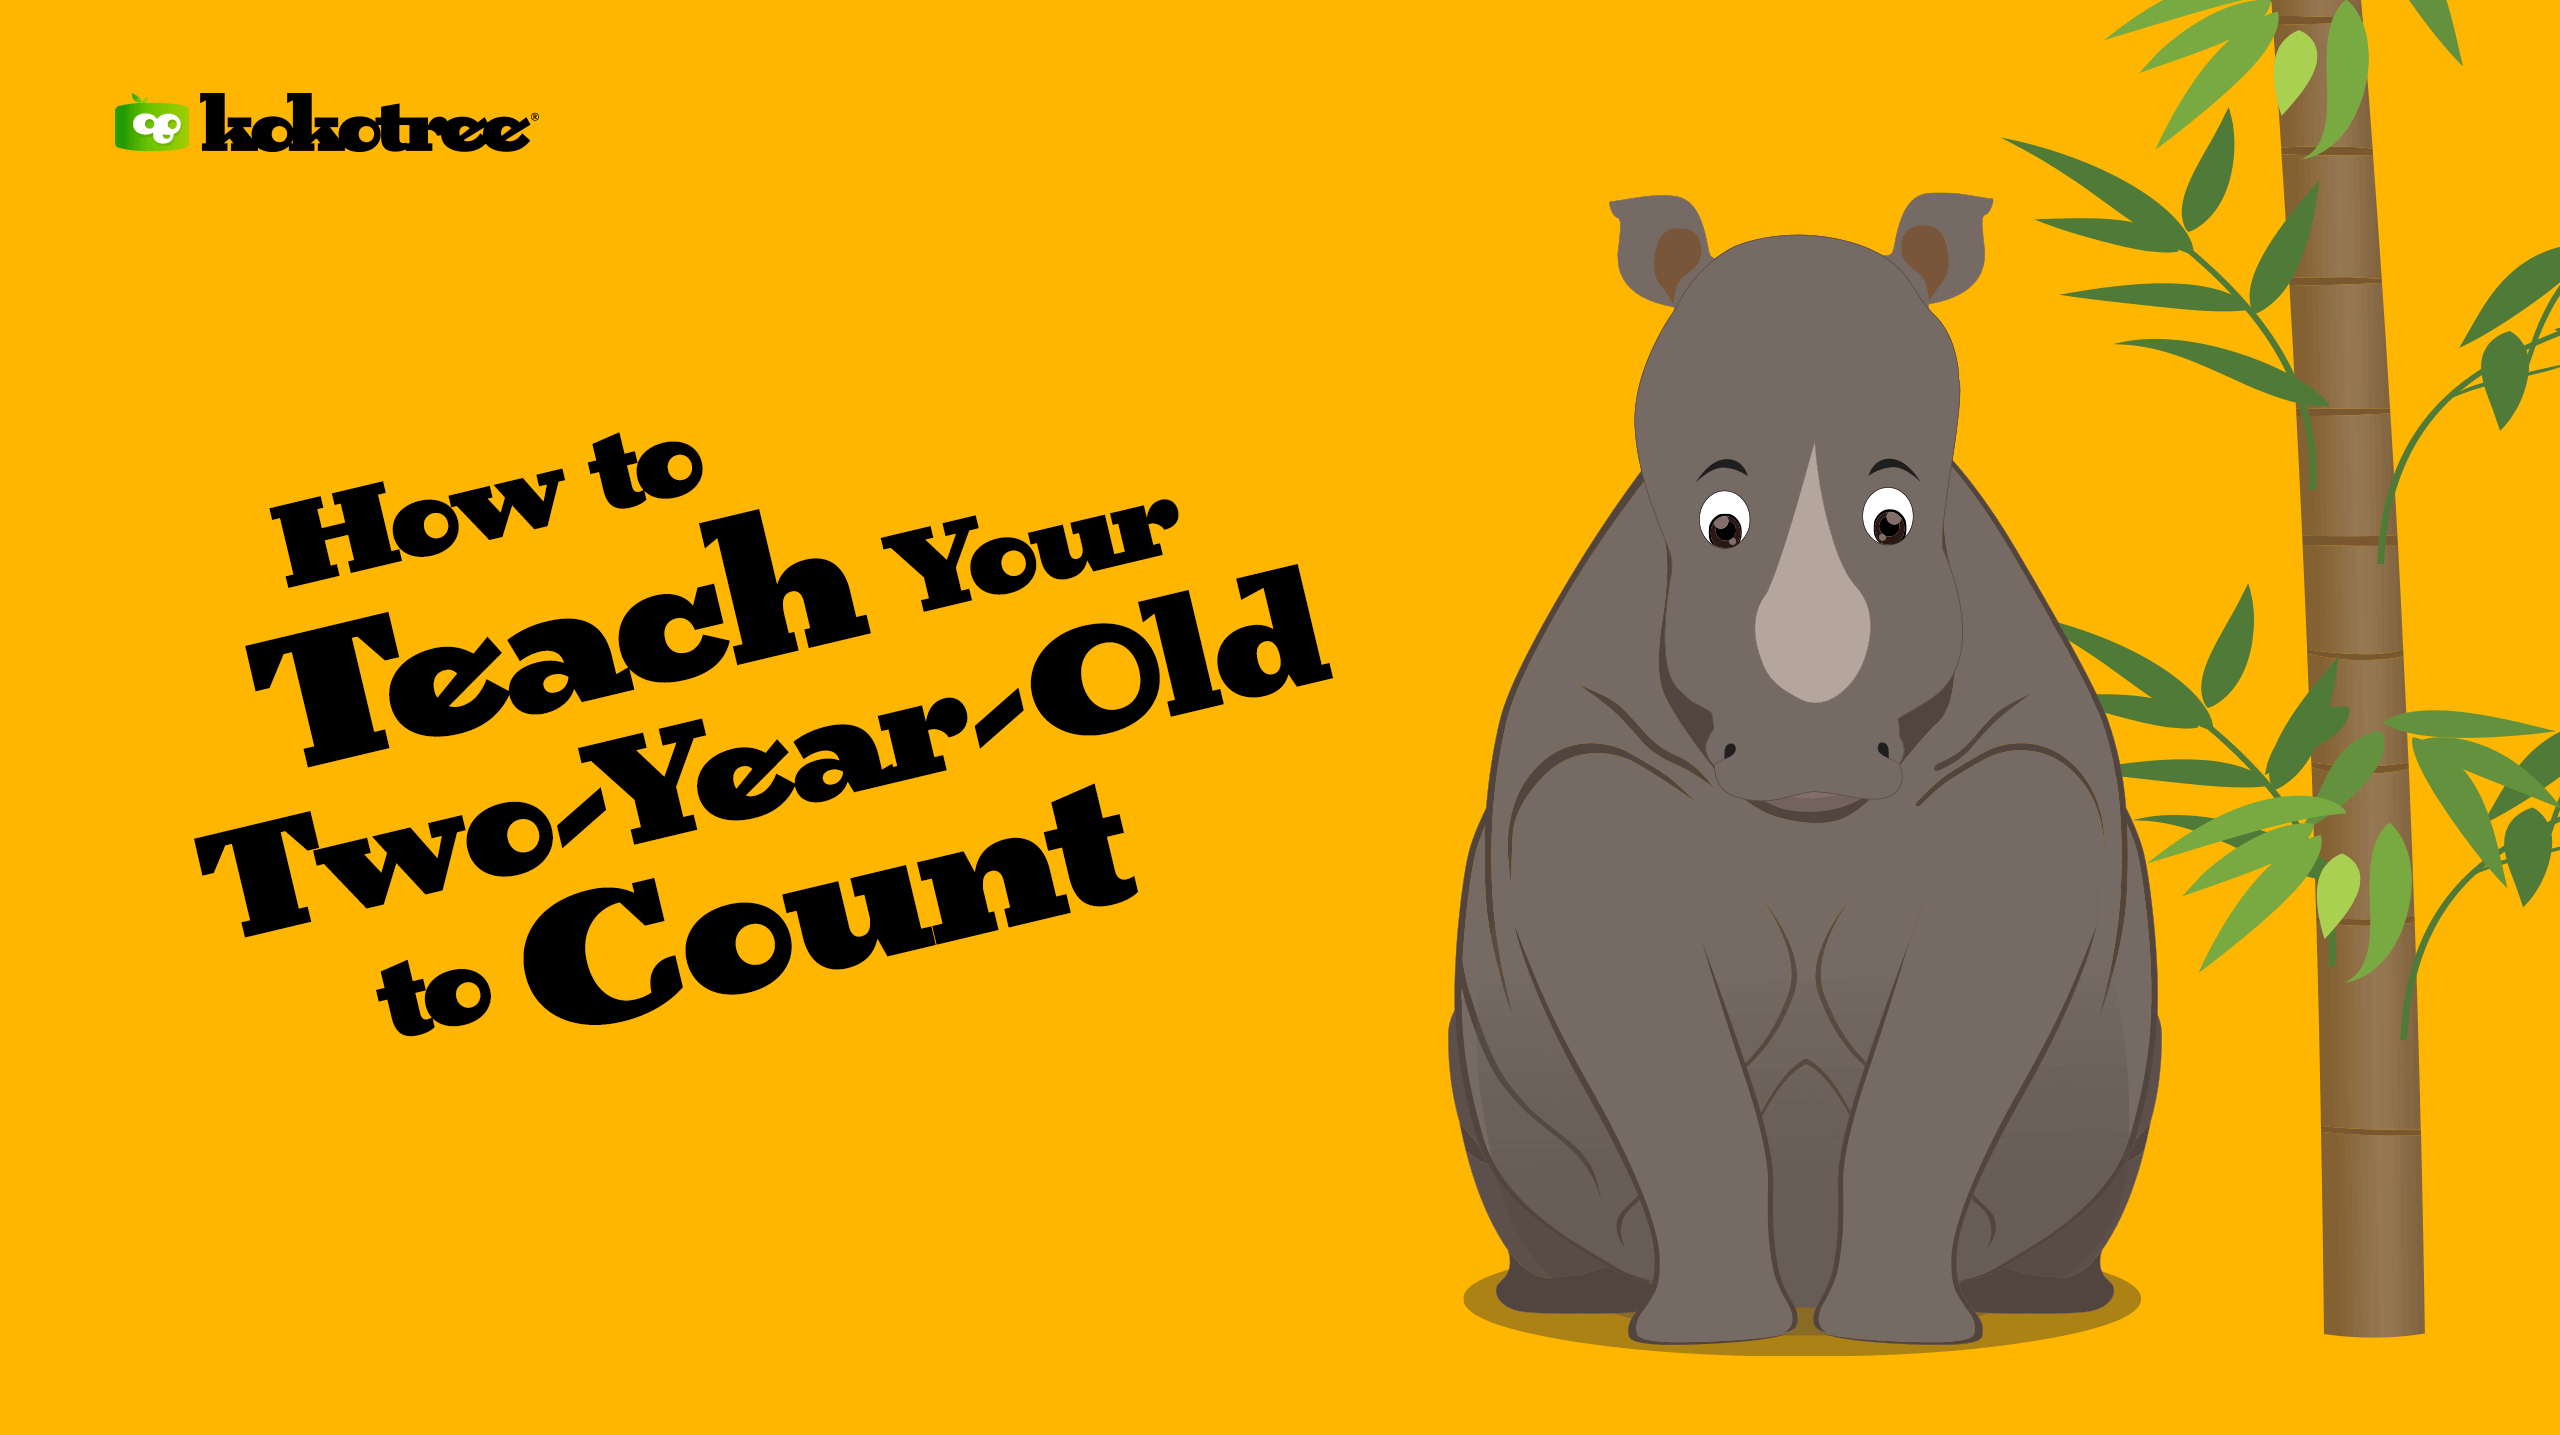 how-to-teach-your-2-year-old-to-count-best-tips-activities-kokotree